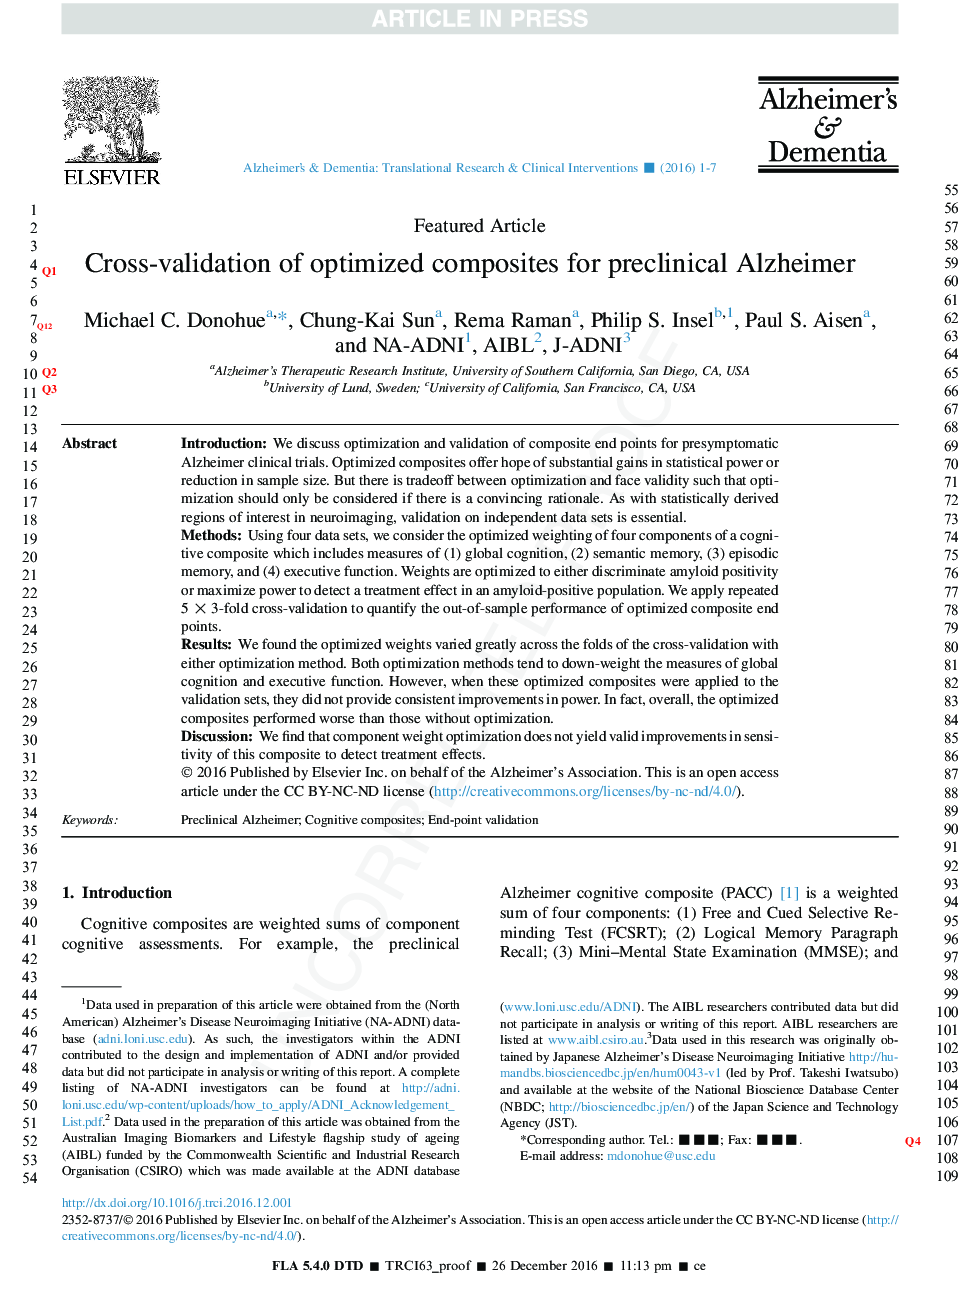 Cross-validation of optimized composites for preclinical Alzheimer's disease